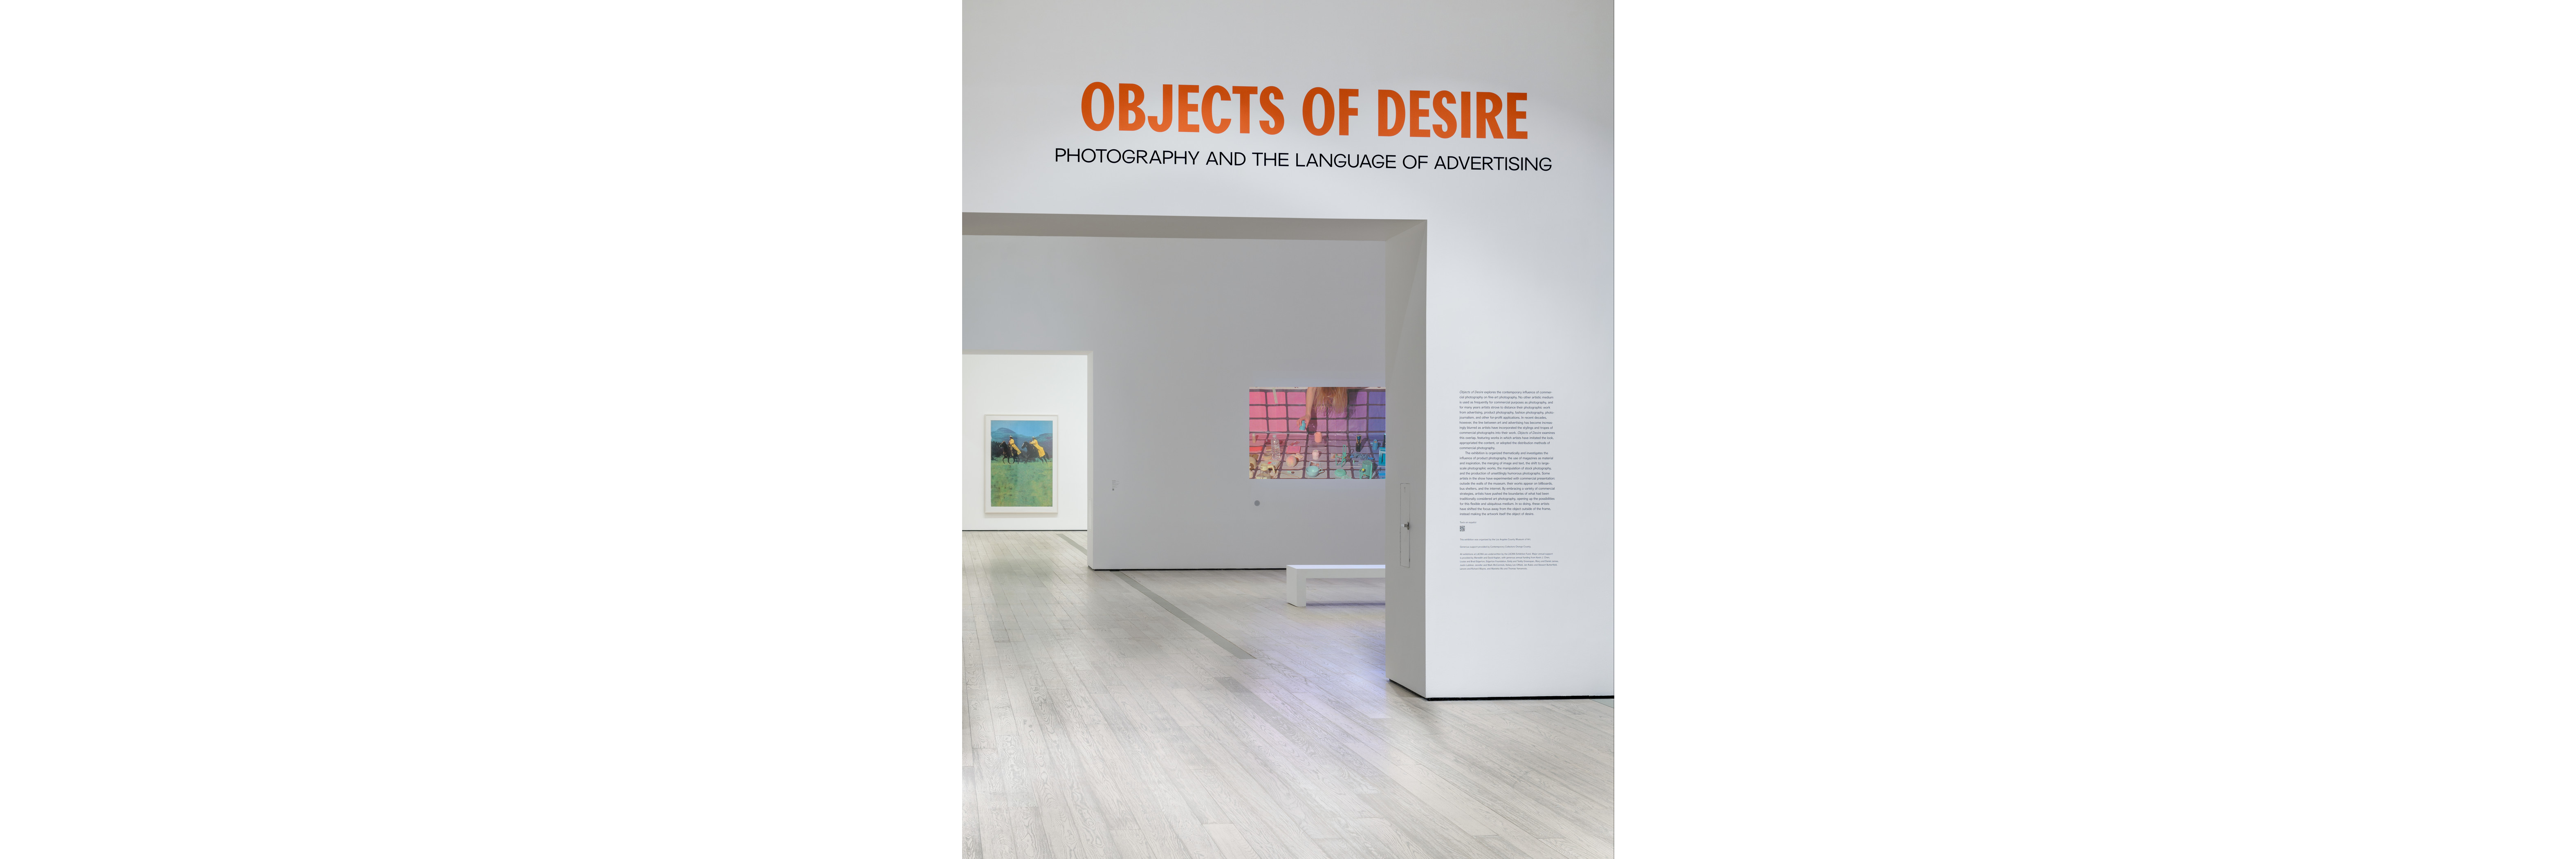 Installation photograph, Objects of Desire: Photography and the Language of Advertising